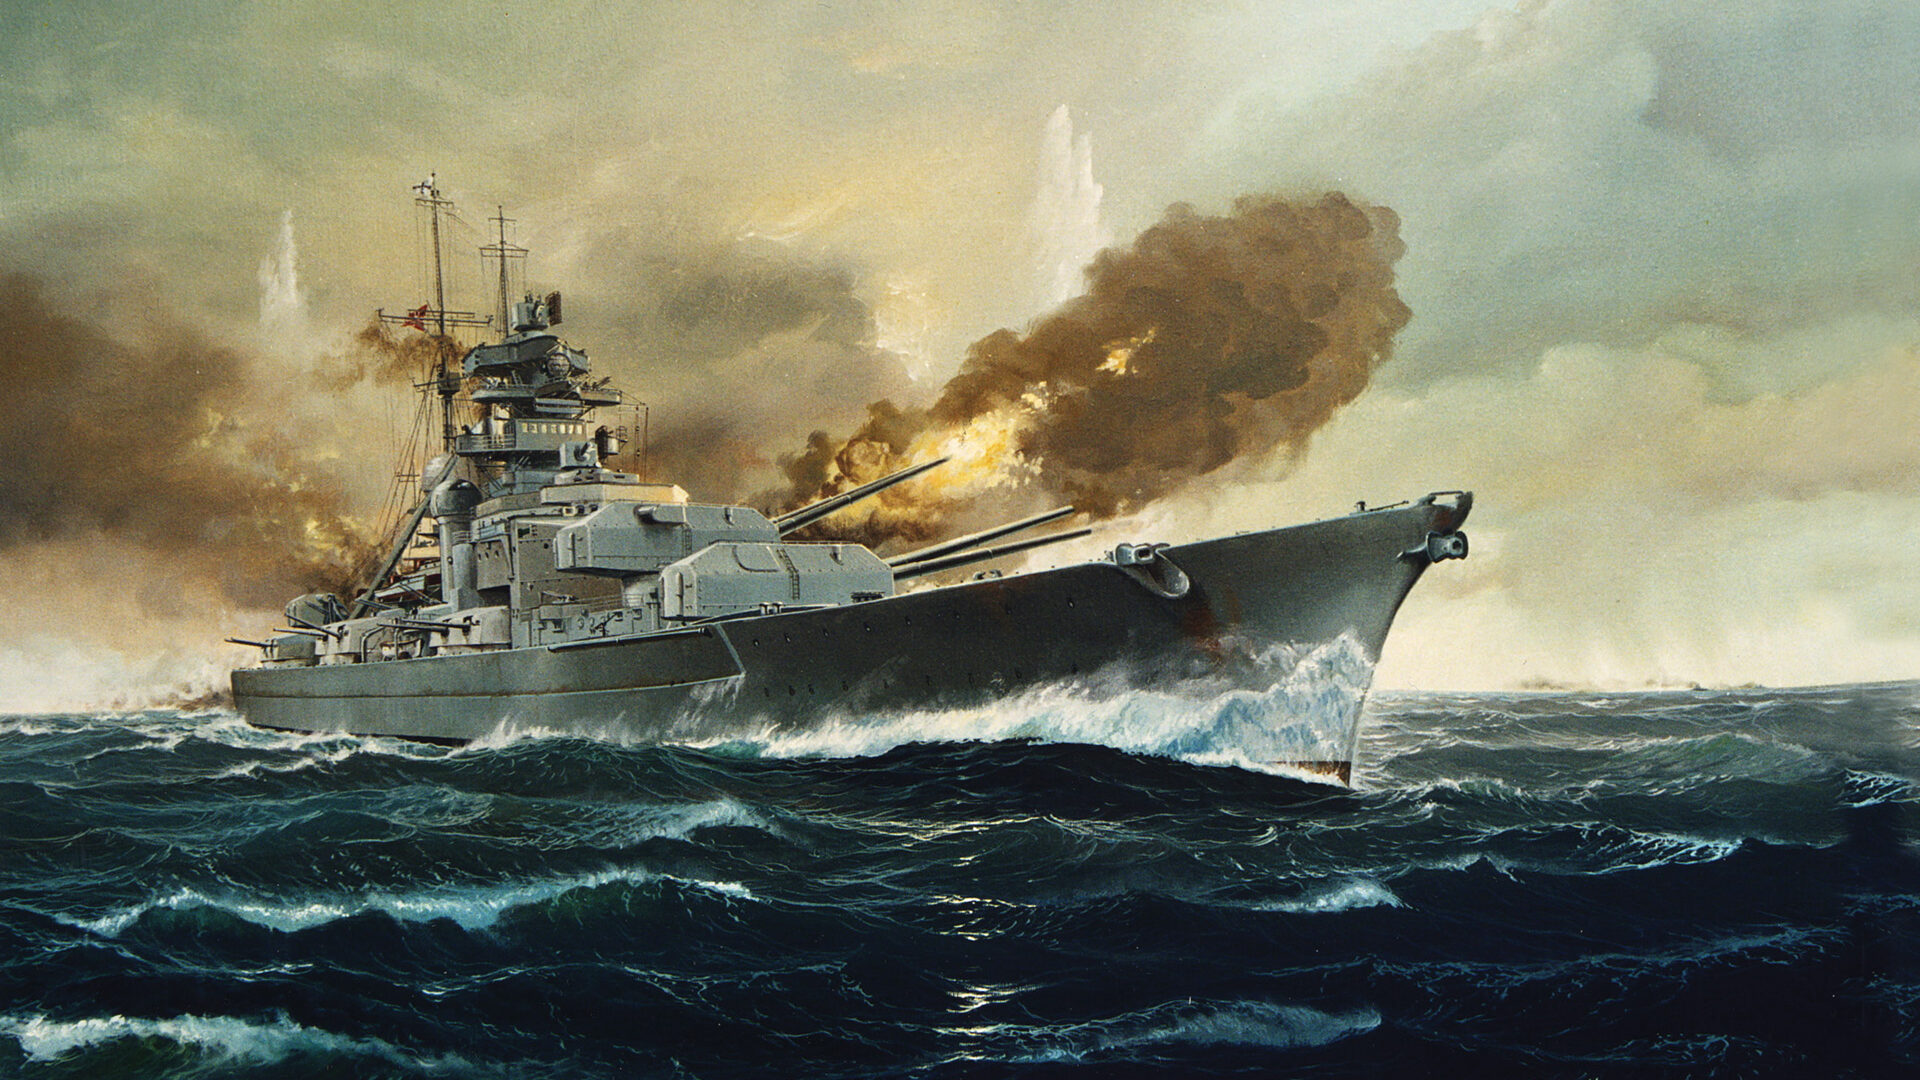 The Bismarck had tremendous firepower. She is shown firing her four double 15-inch guns in a modern painting.